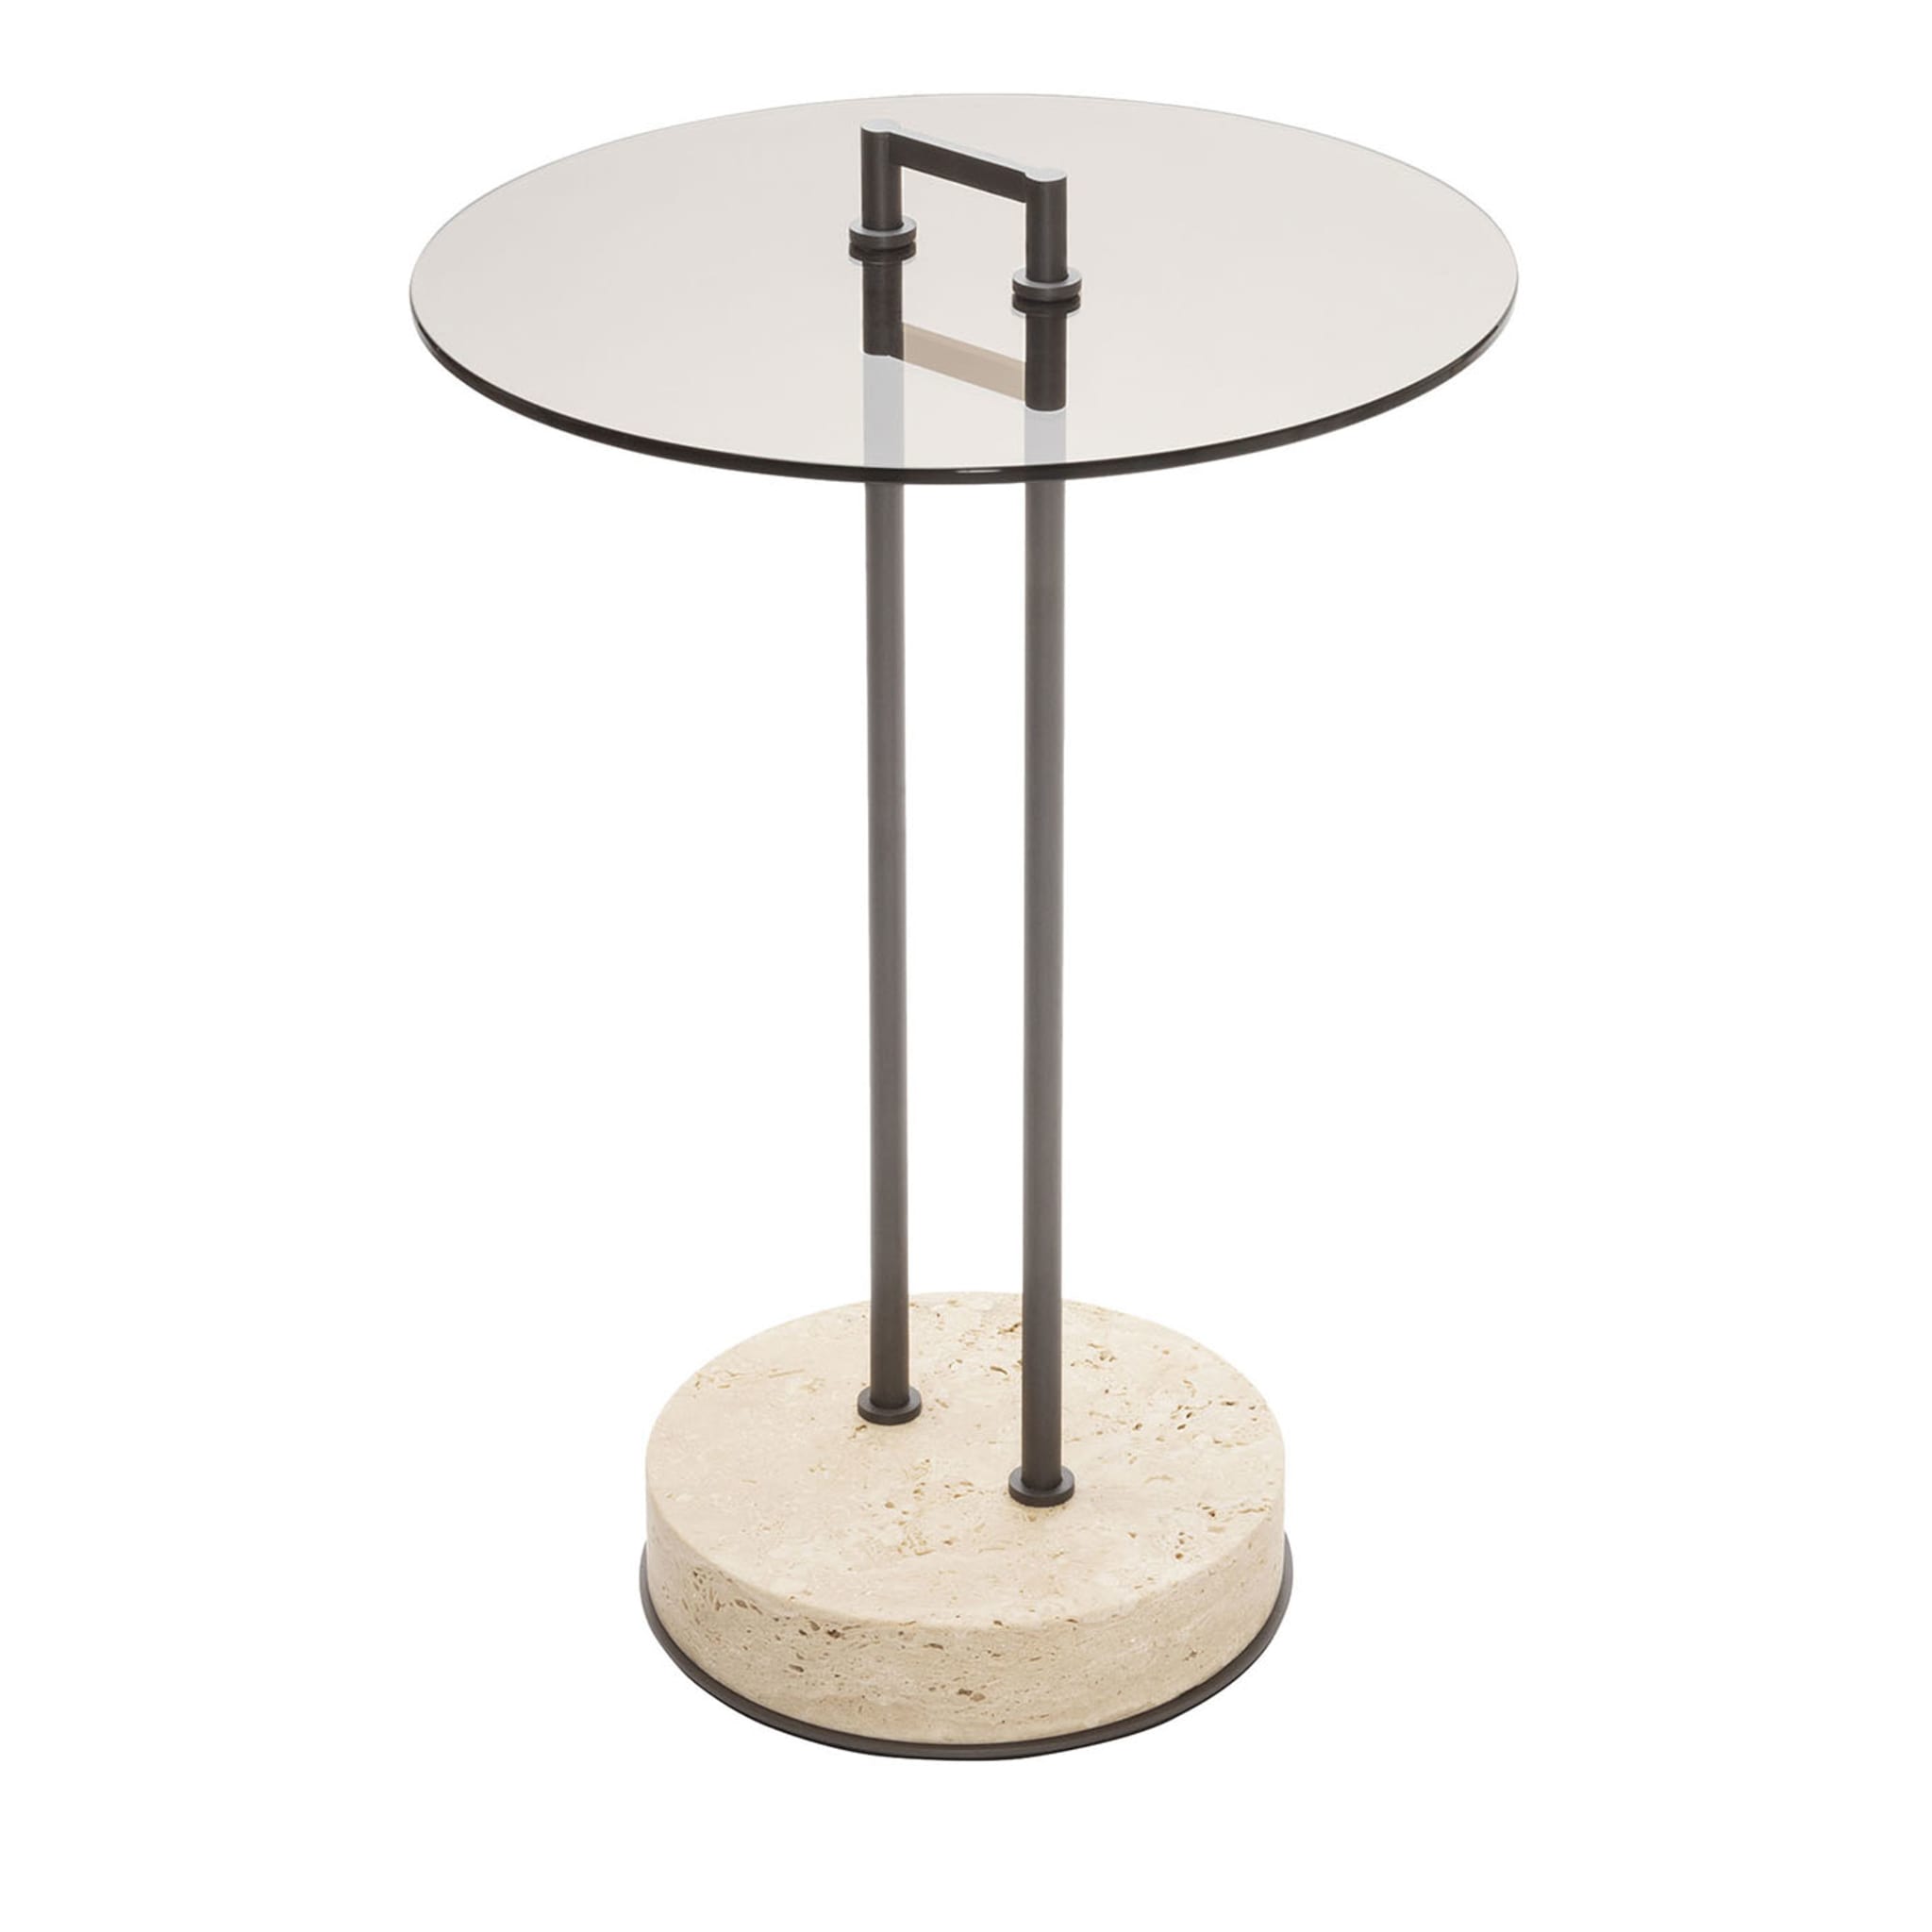 Urbino Marble Occasional Table #2 - Main view